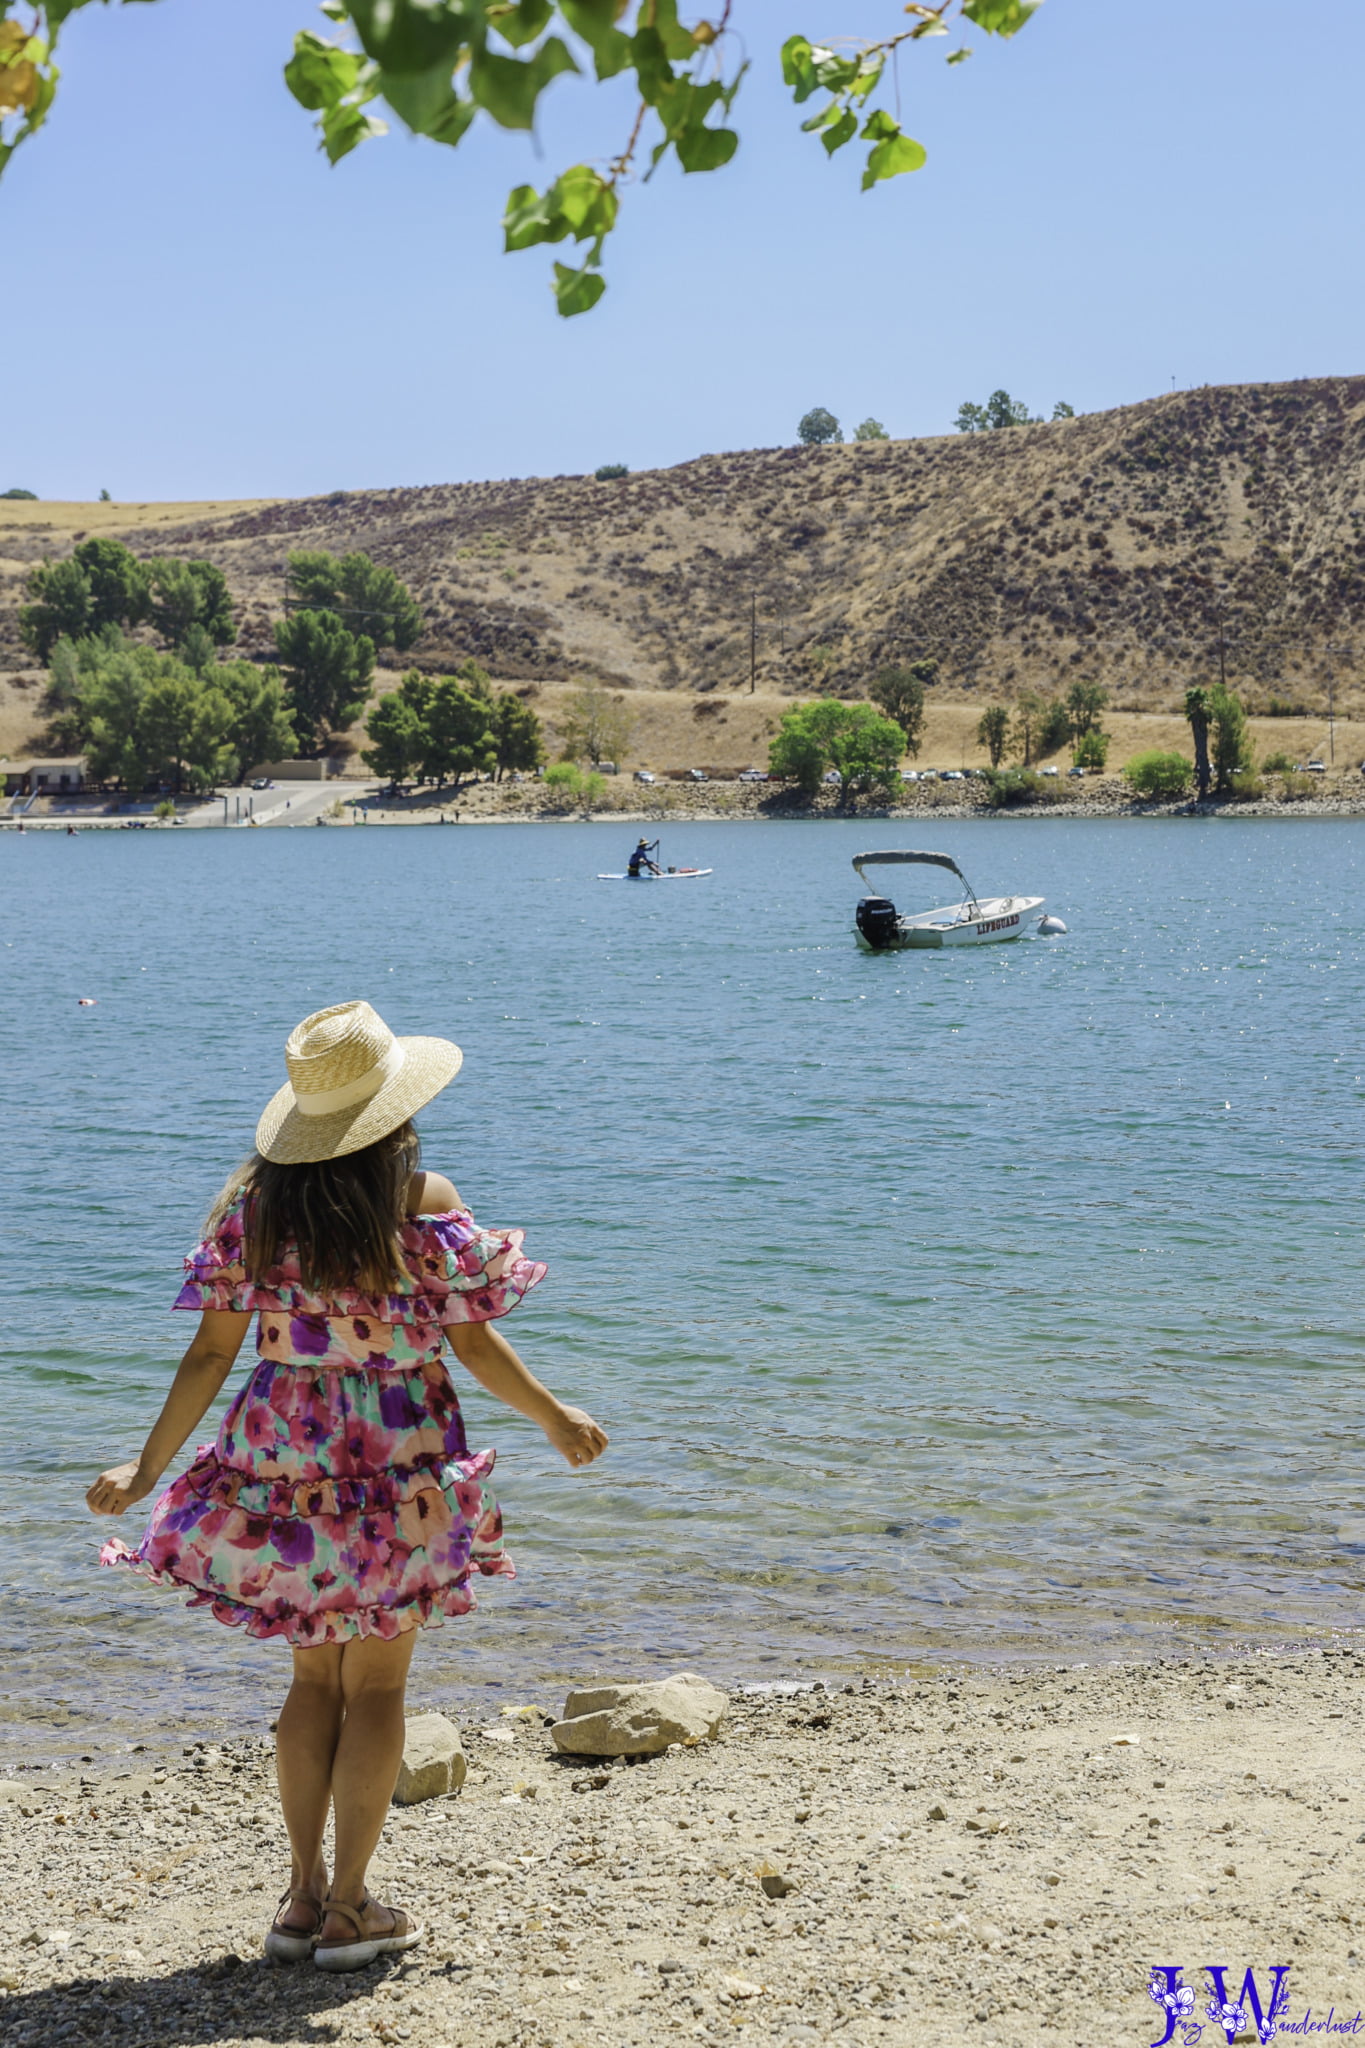 Near the water at Castaic Lake in California. Photography by Jaz Wanderlust.